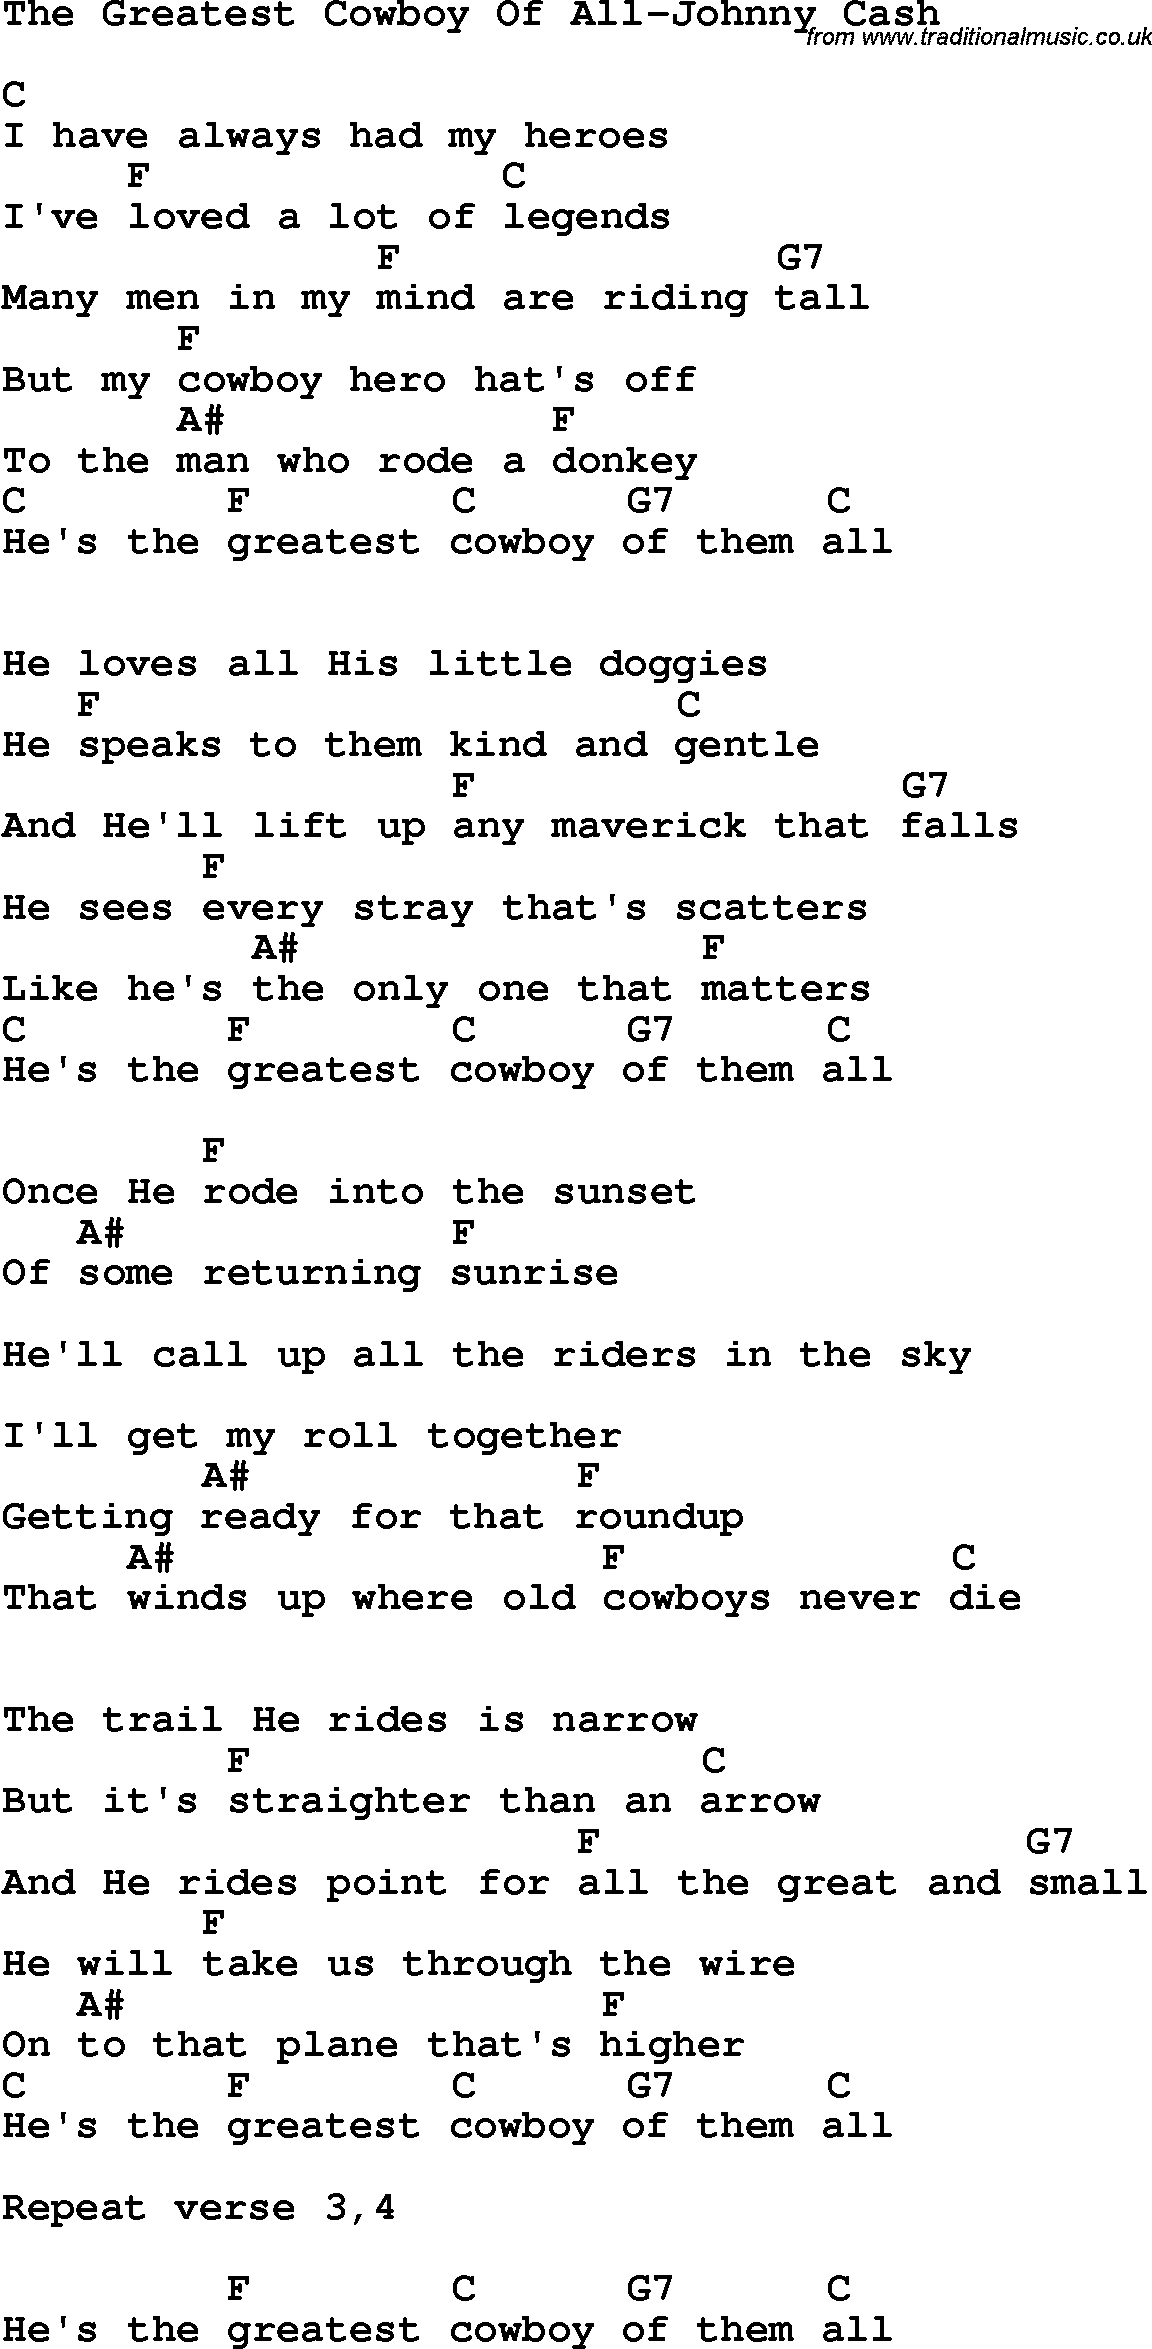 Country, Southern and Bluegrass Gospel Song The Greatest Cowboy Of All-Johnny Cash lyrics and chords